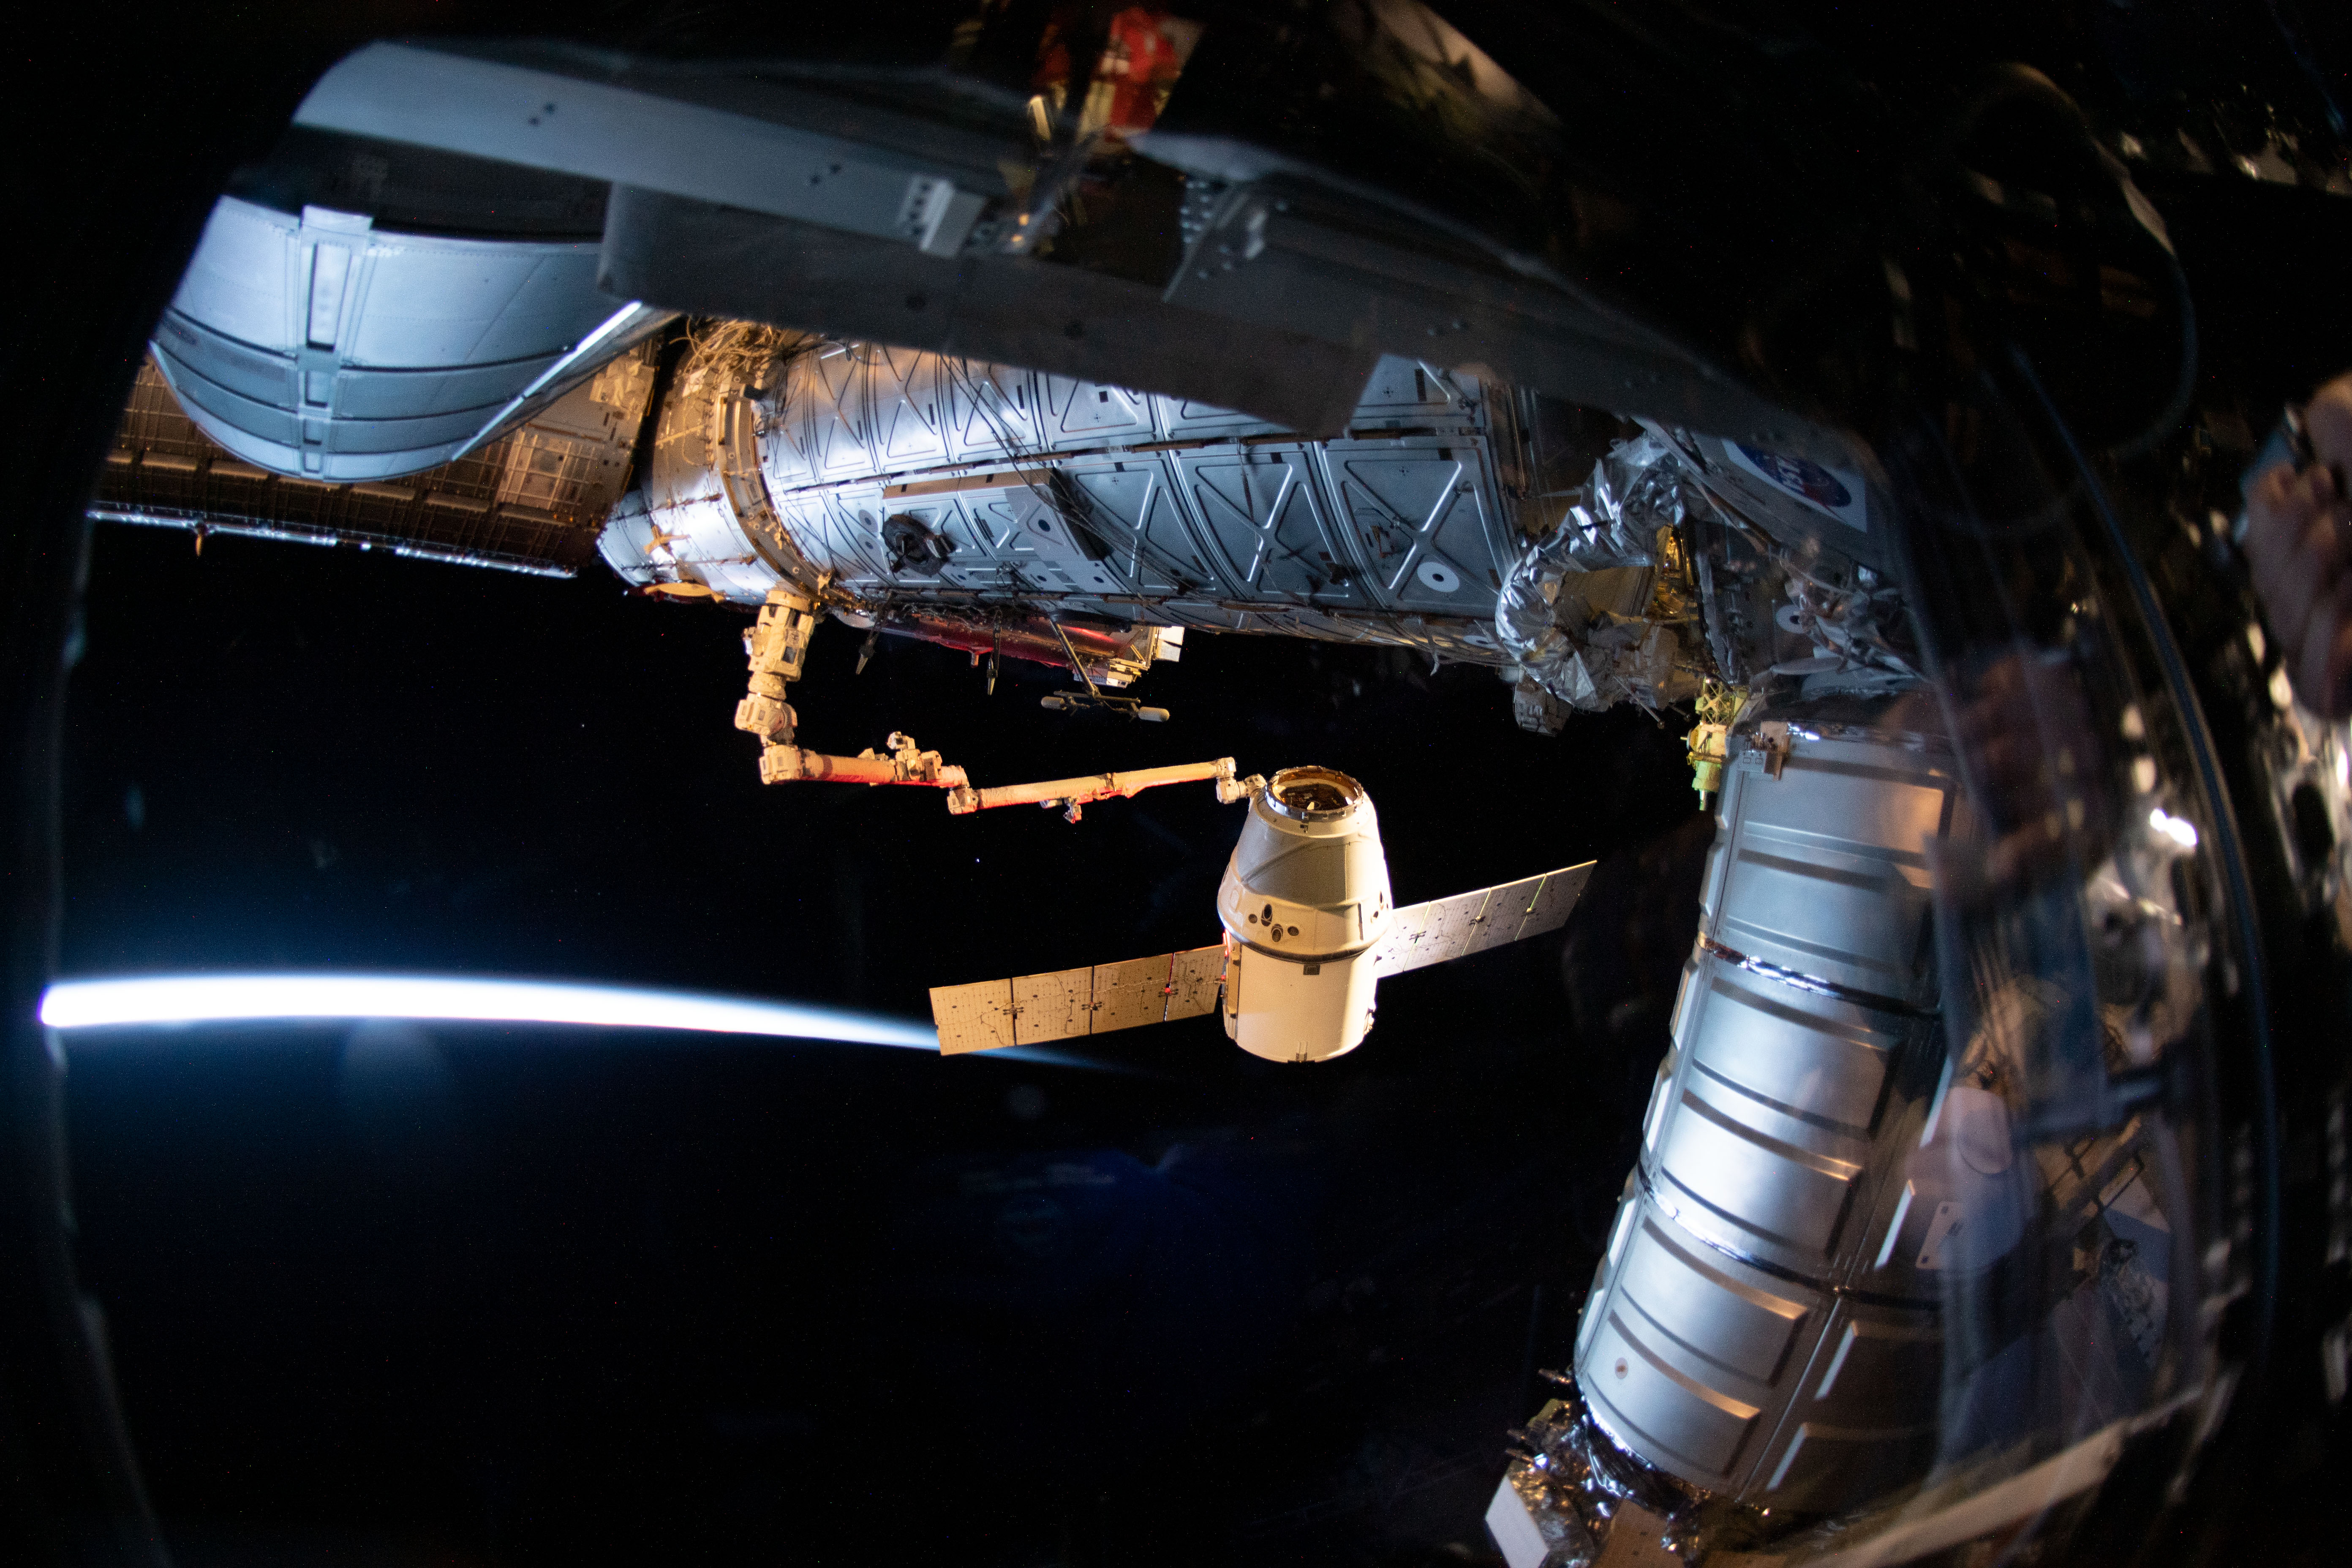 The SpaceX Dragon cargo craft on its 17th contracted mission to resupply mission to the International Space Station is pictured moments before being released from the Canadarm2 robotic arm.